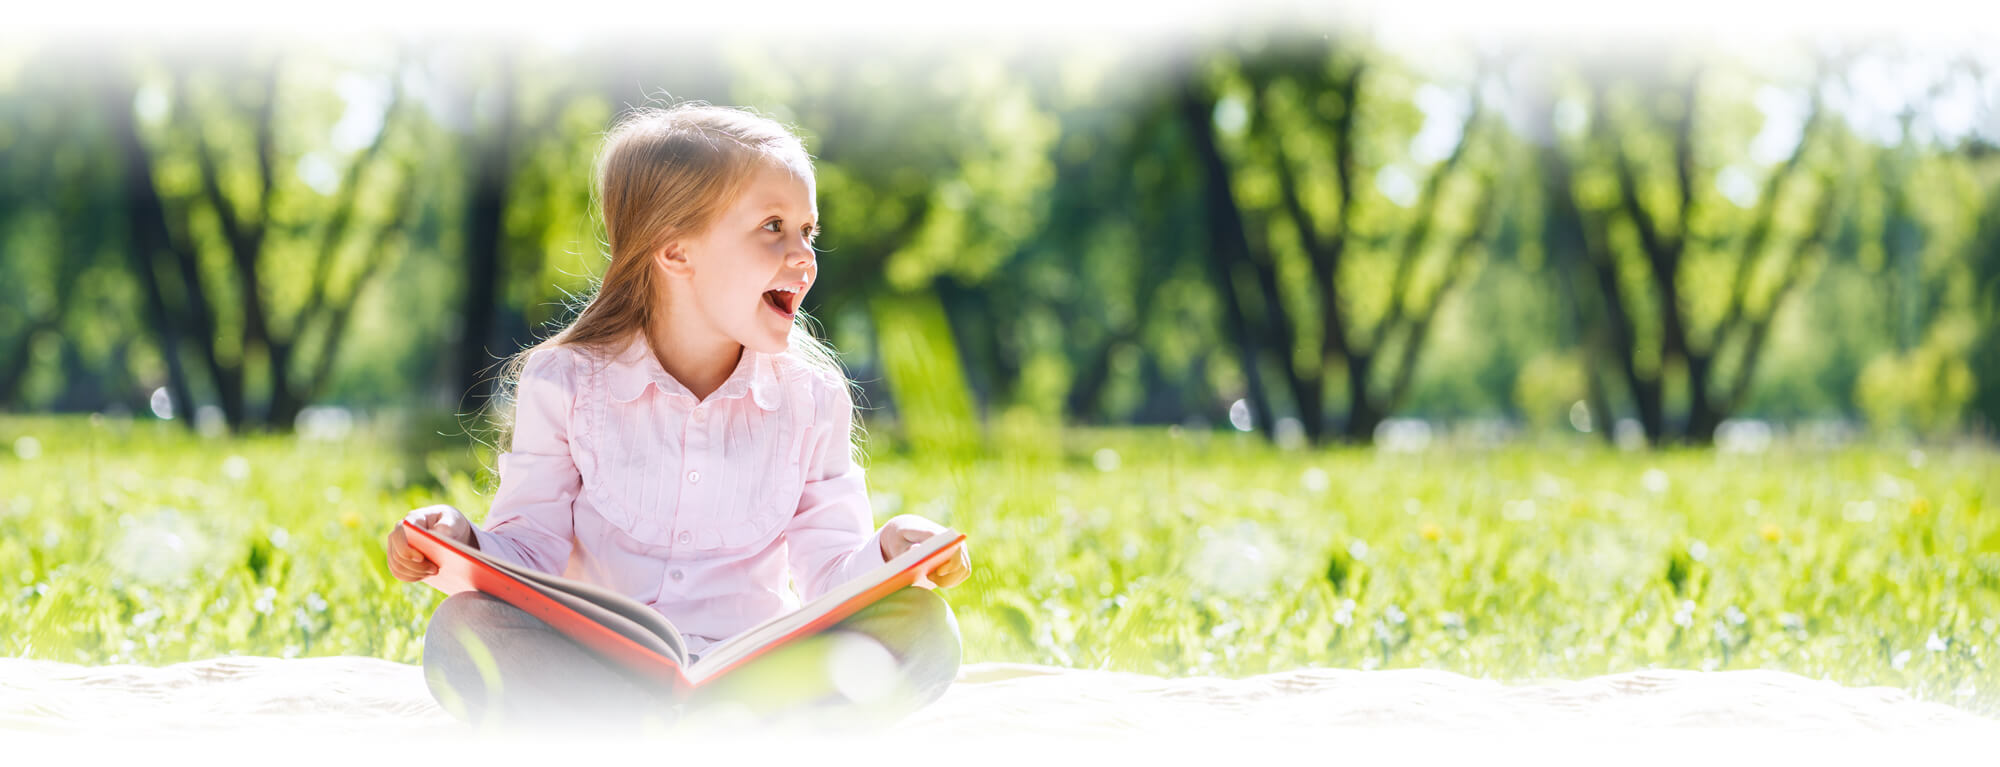 excited young girl holding book